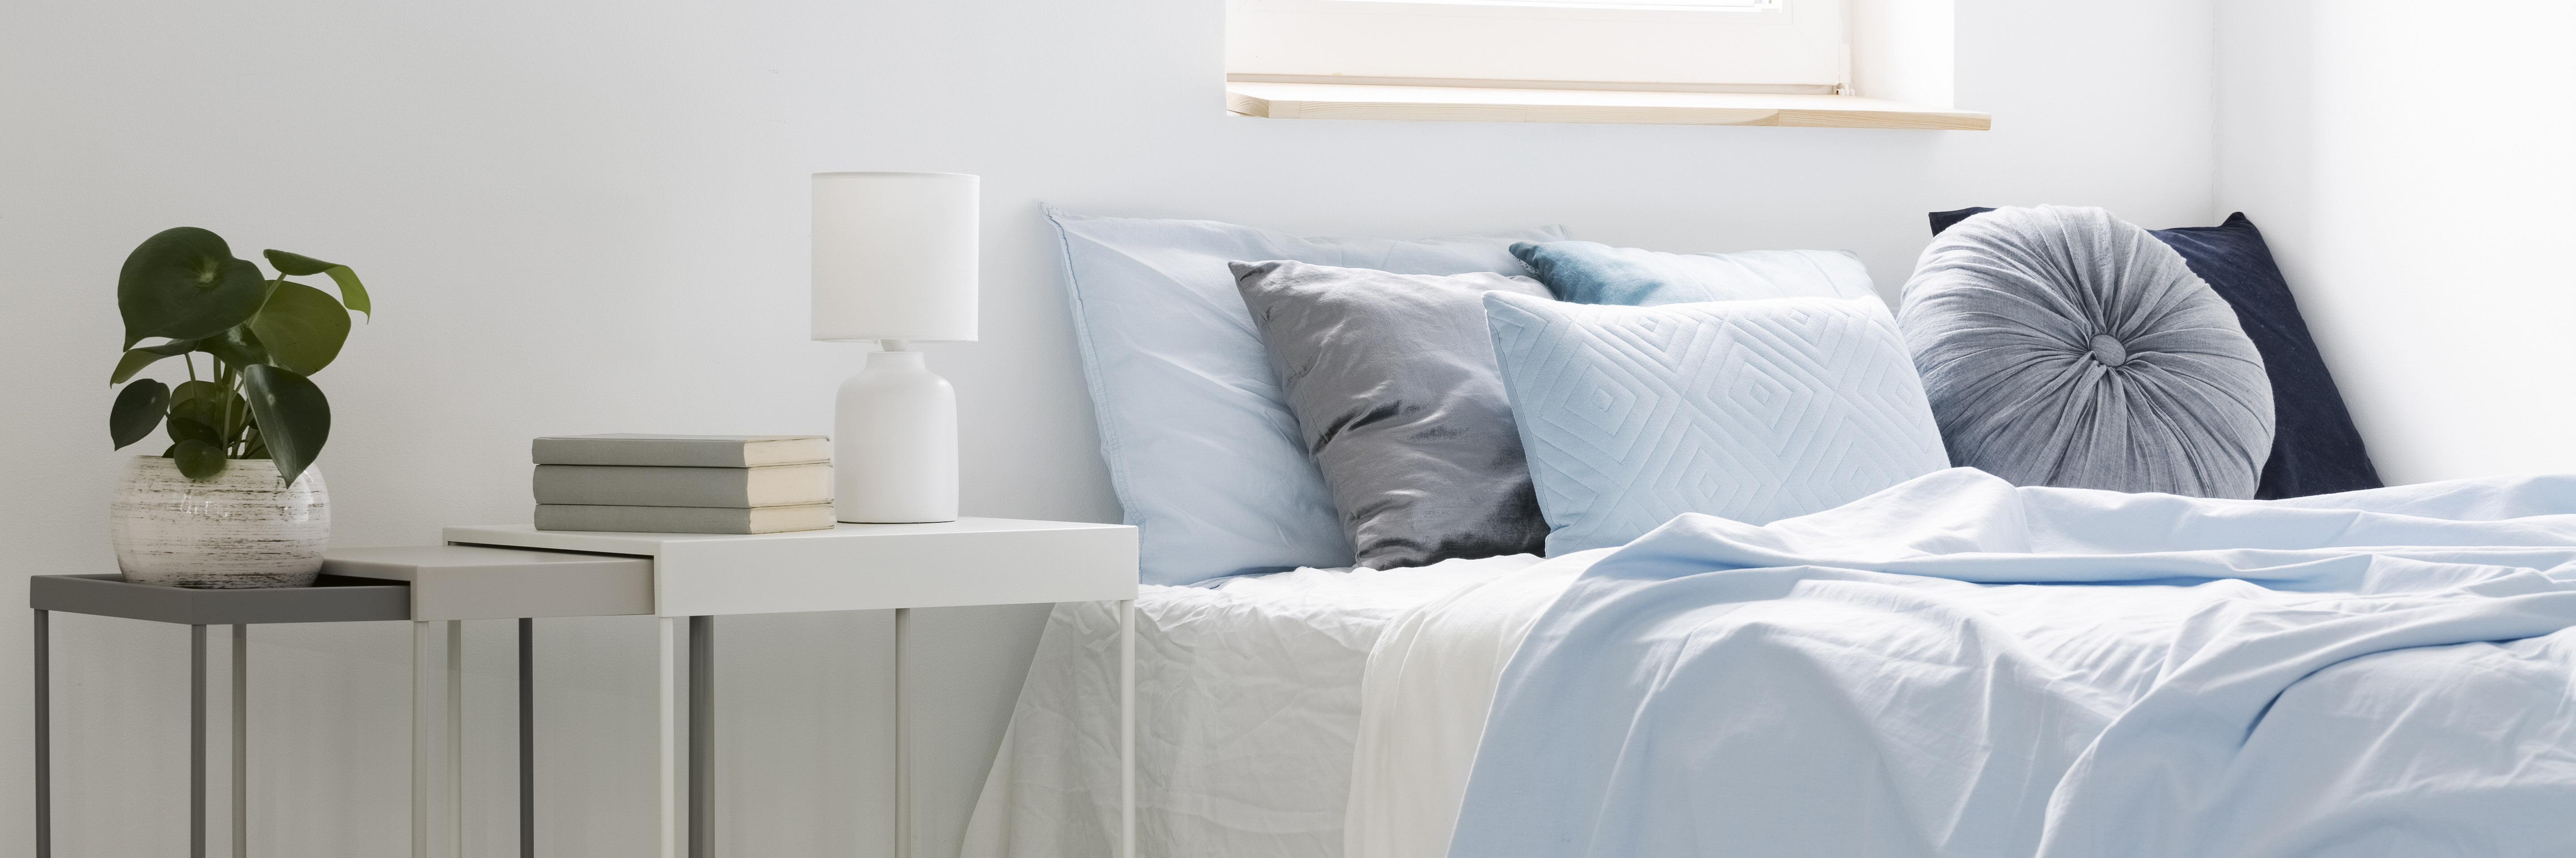 bed with blue bedding and cushions standing next to white tables with books